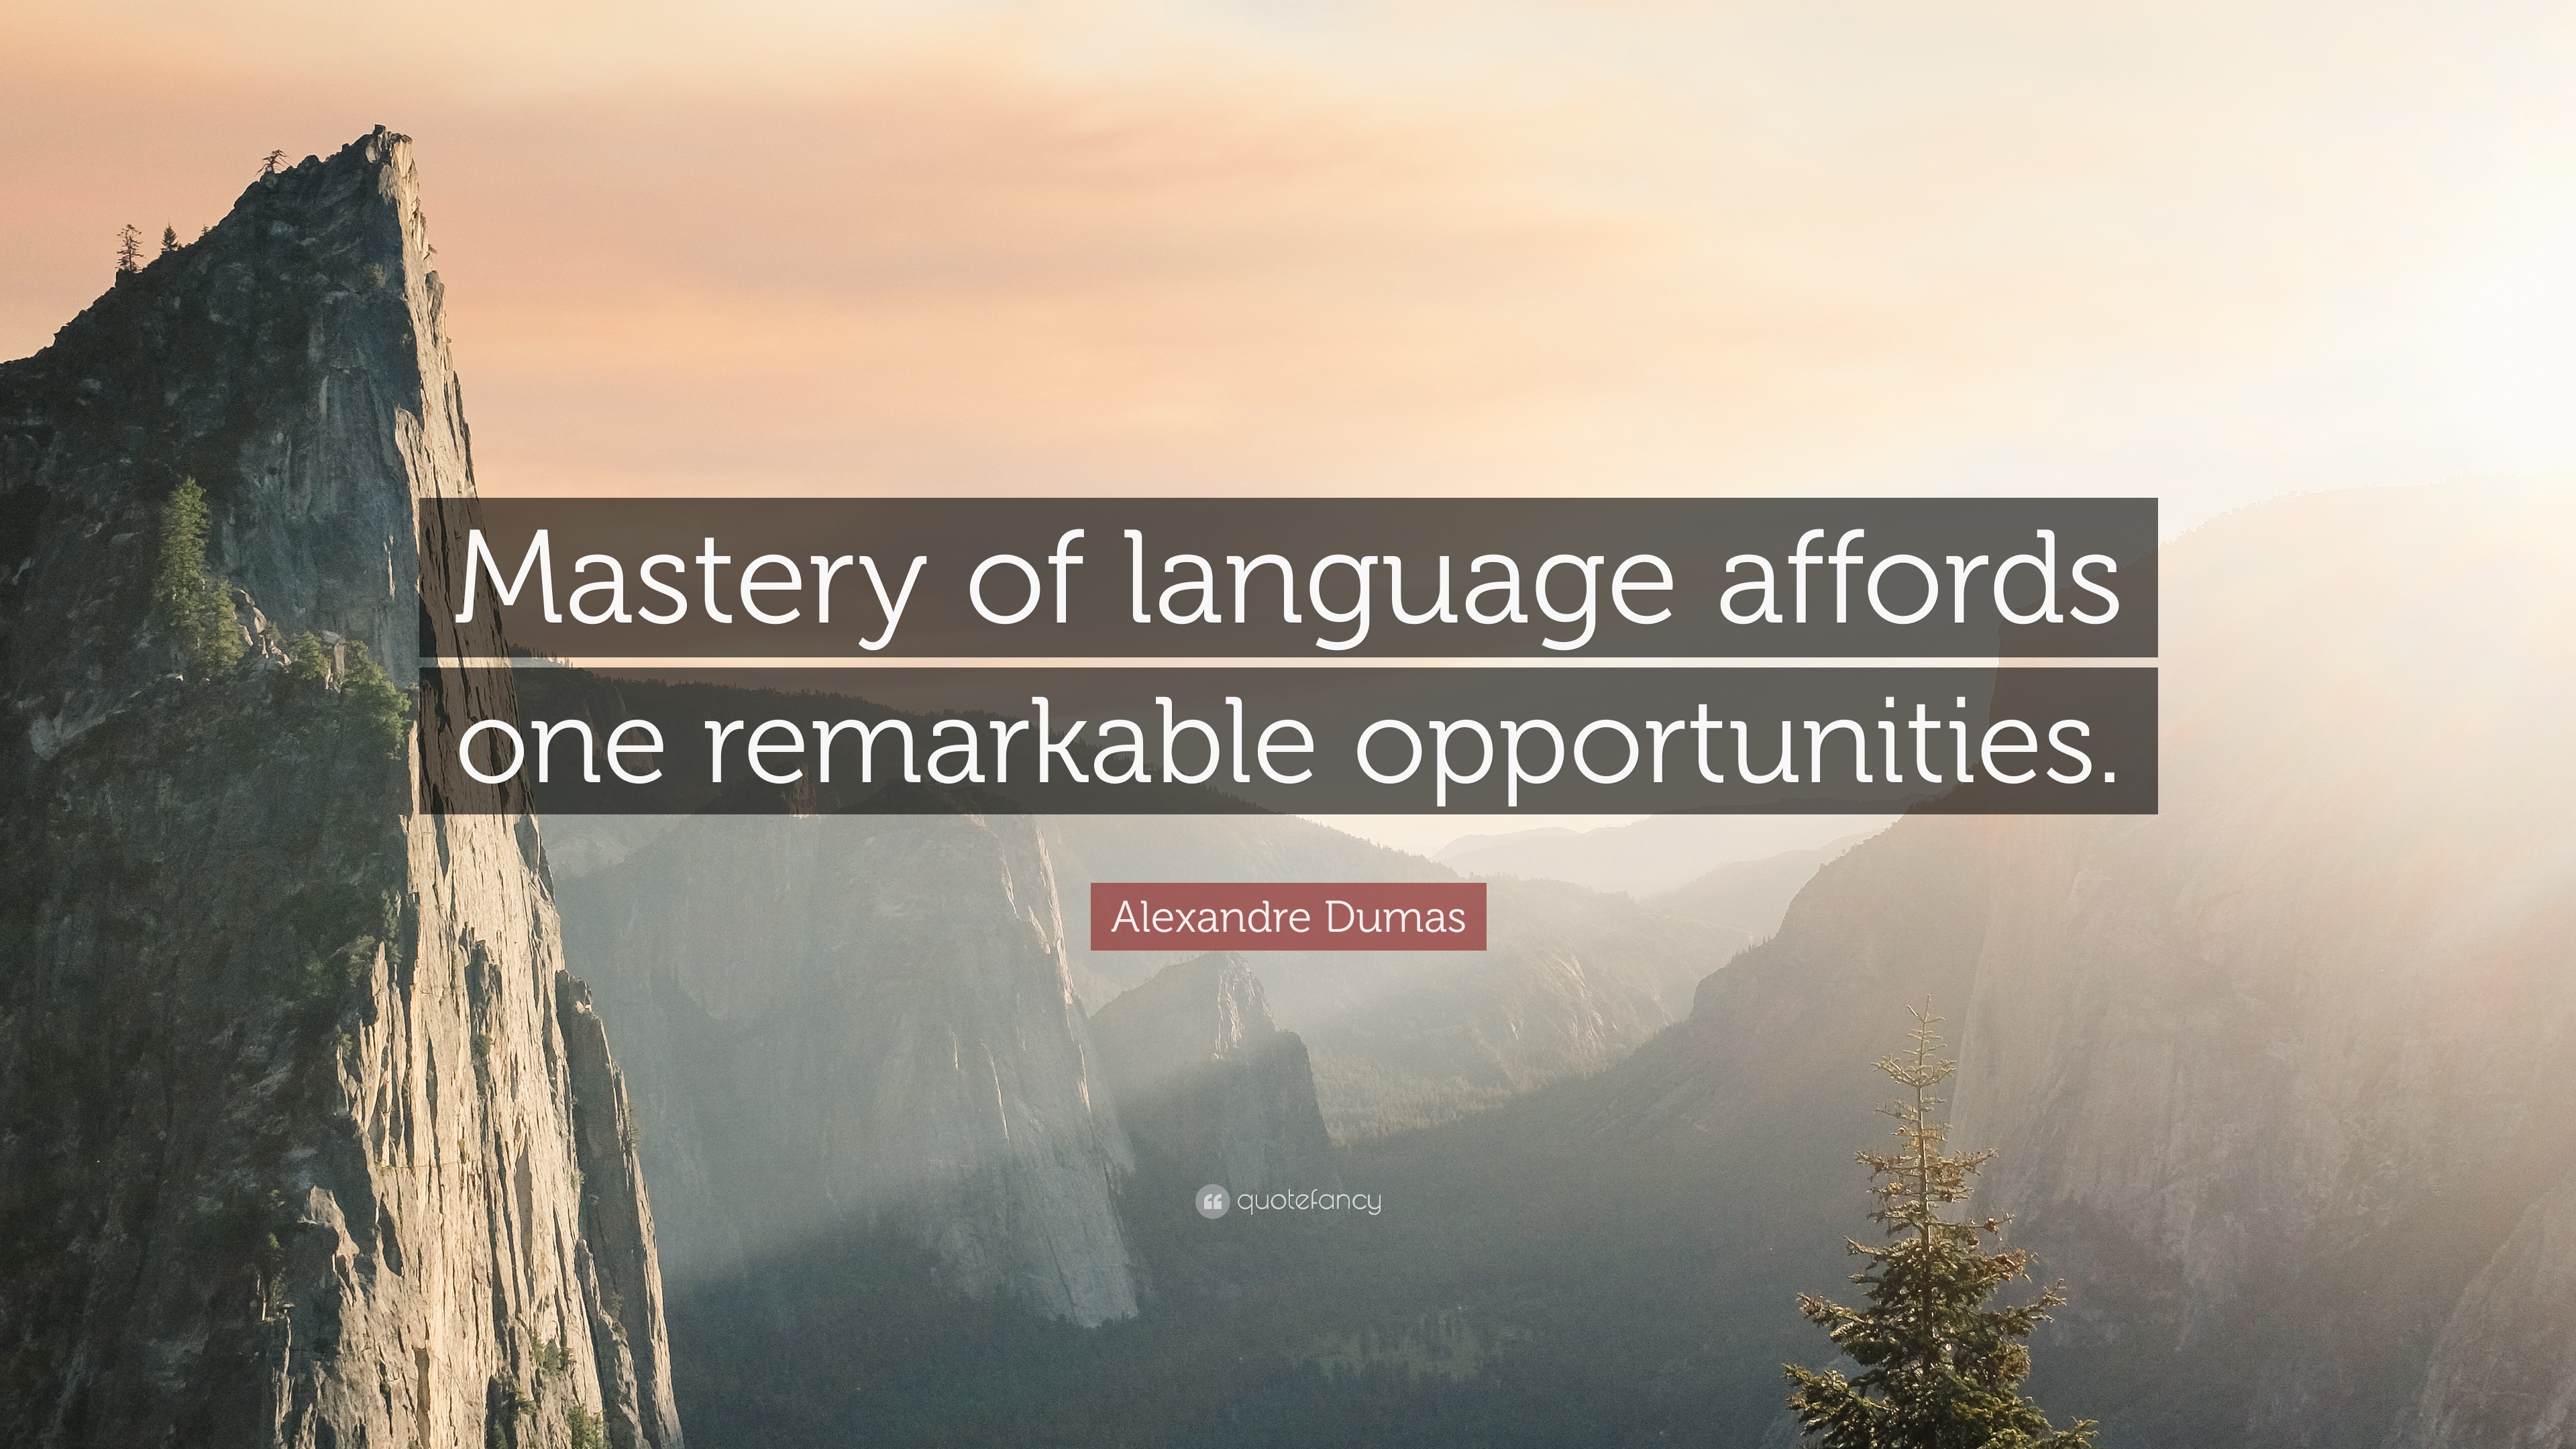 Alexandre Dumas Quote: “Mastery of language affords one remarkable  opportunities.”